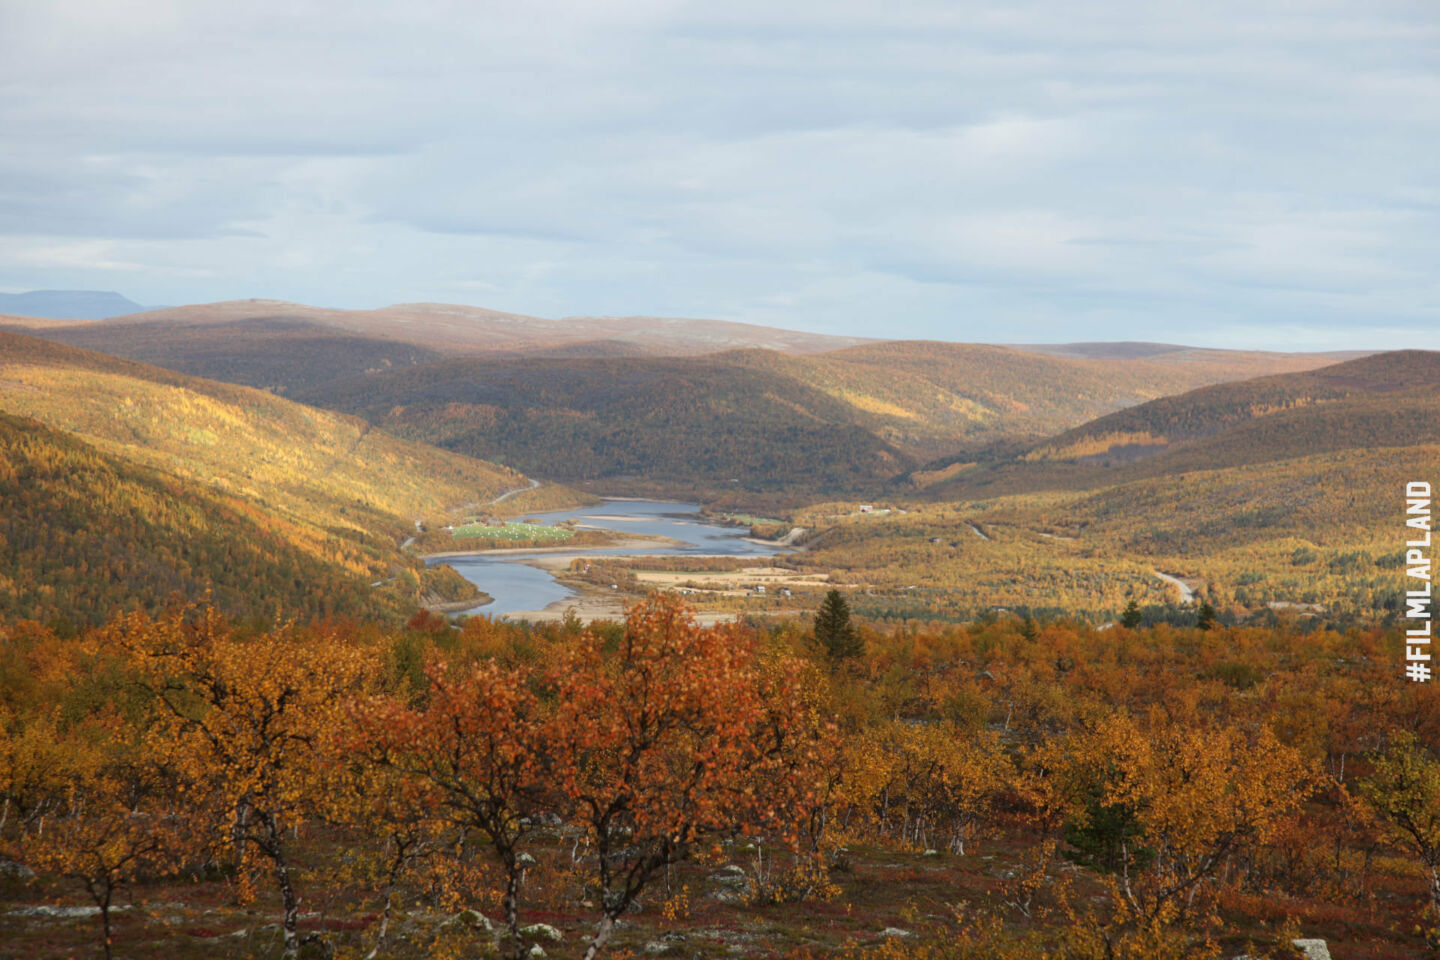 The sun shines down on Utsjoki, Finland and its autumn colors